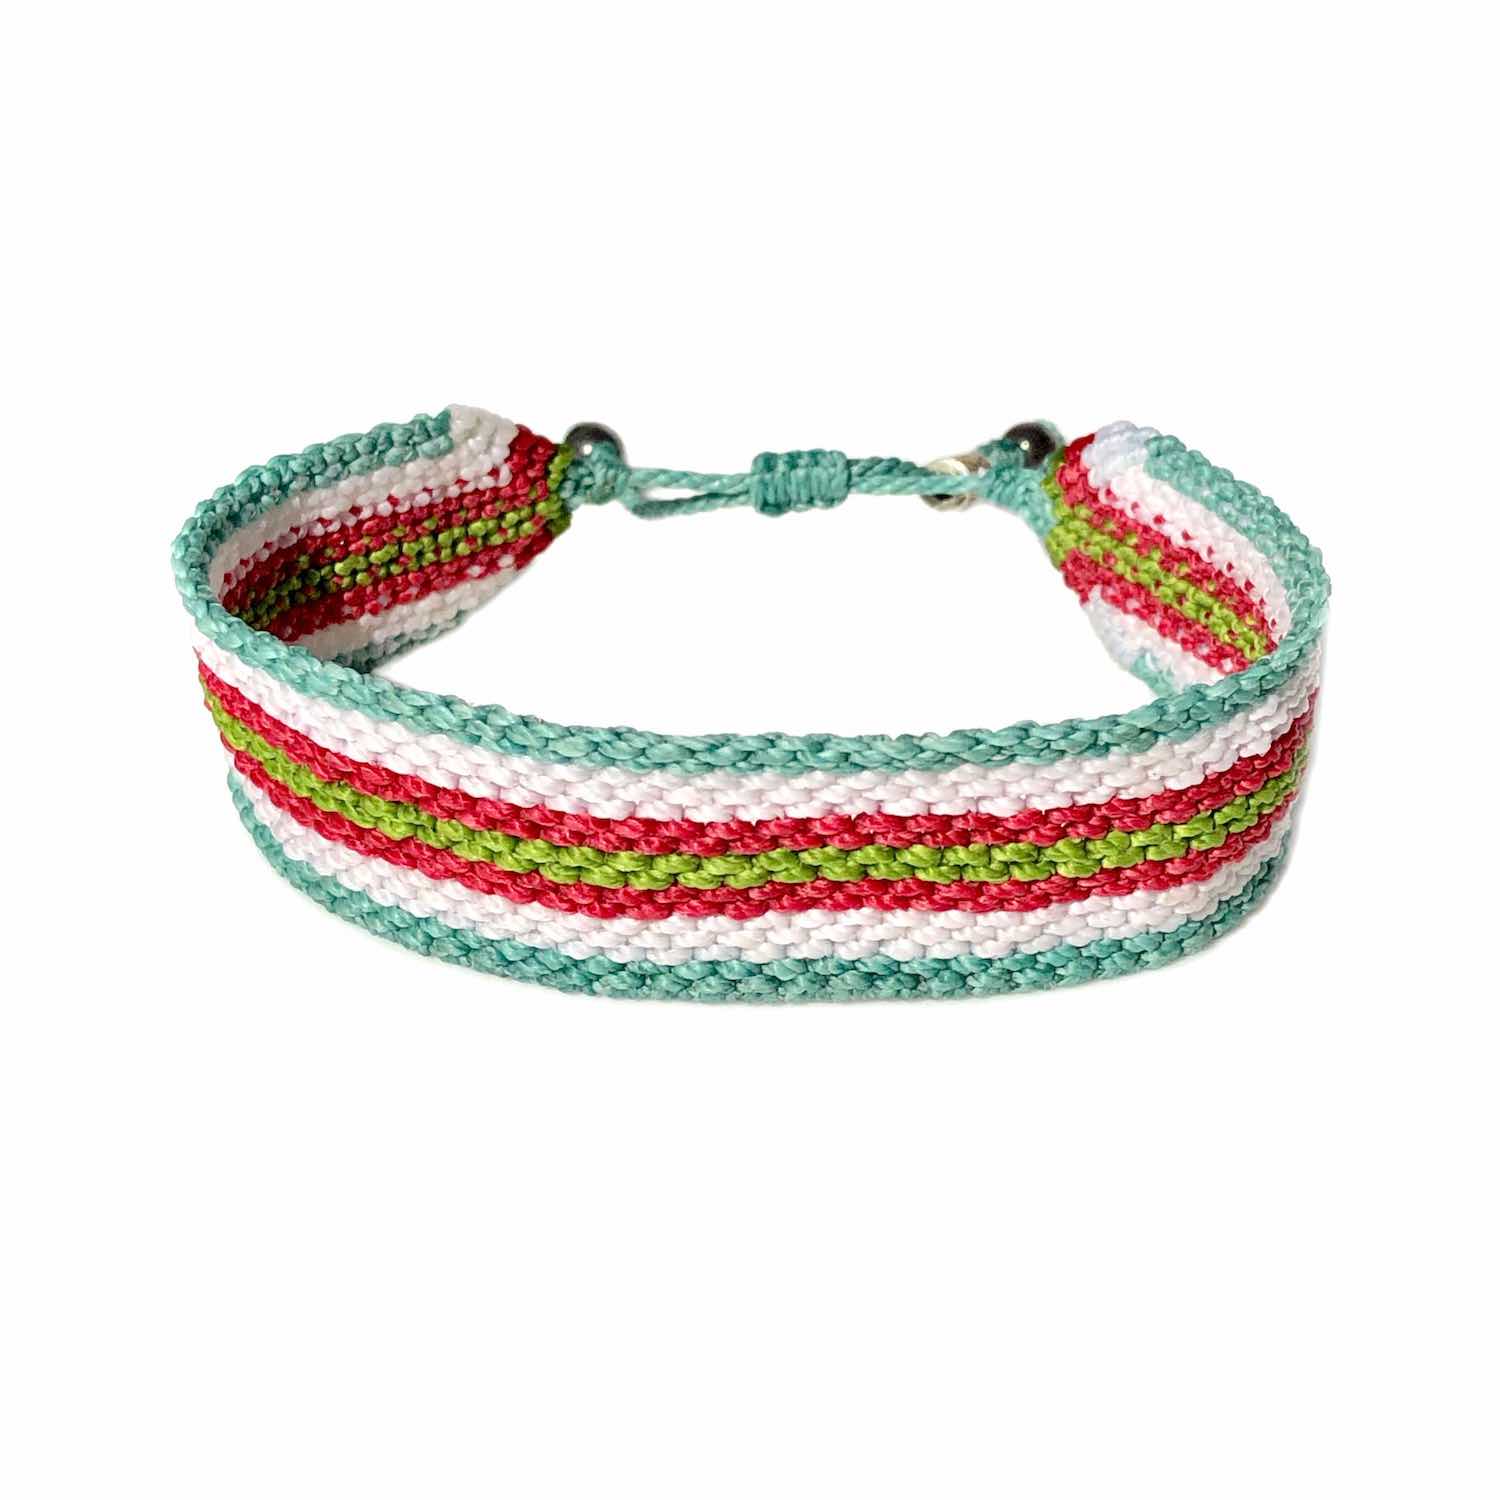 Colorful Mens Bracelet | Hand-Knotted Sailor Rope Bracelets for Men by Rumi Sumaq Jewelry | Handmade on Martha's Vineyard